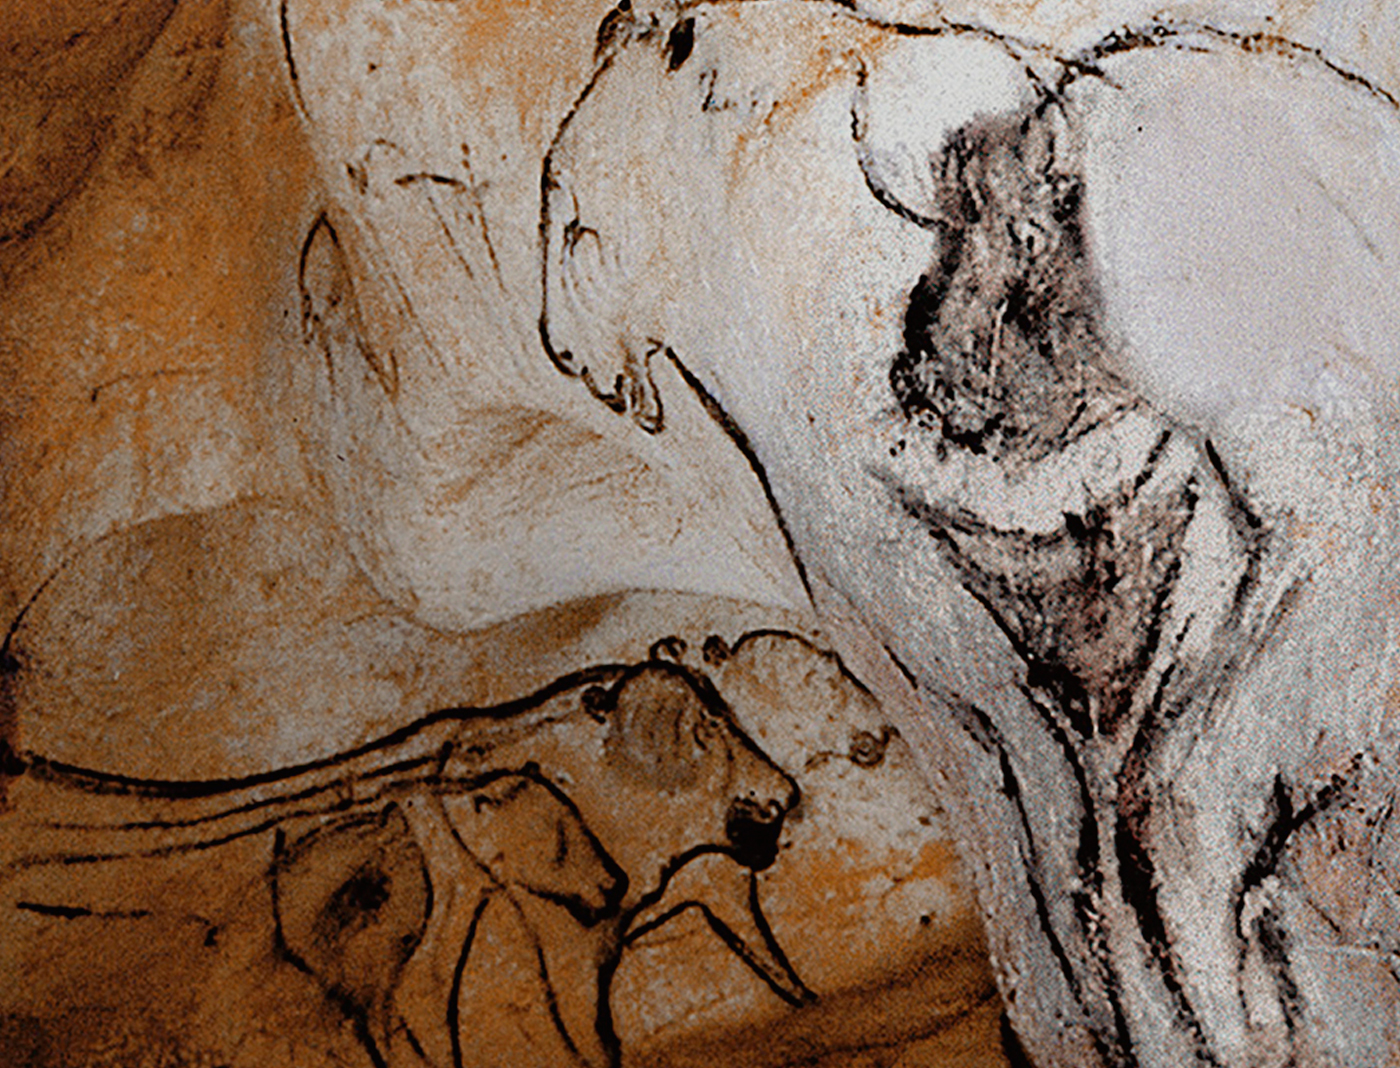 Sorcerer from the Chauvet Cave